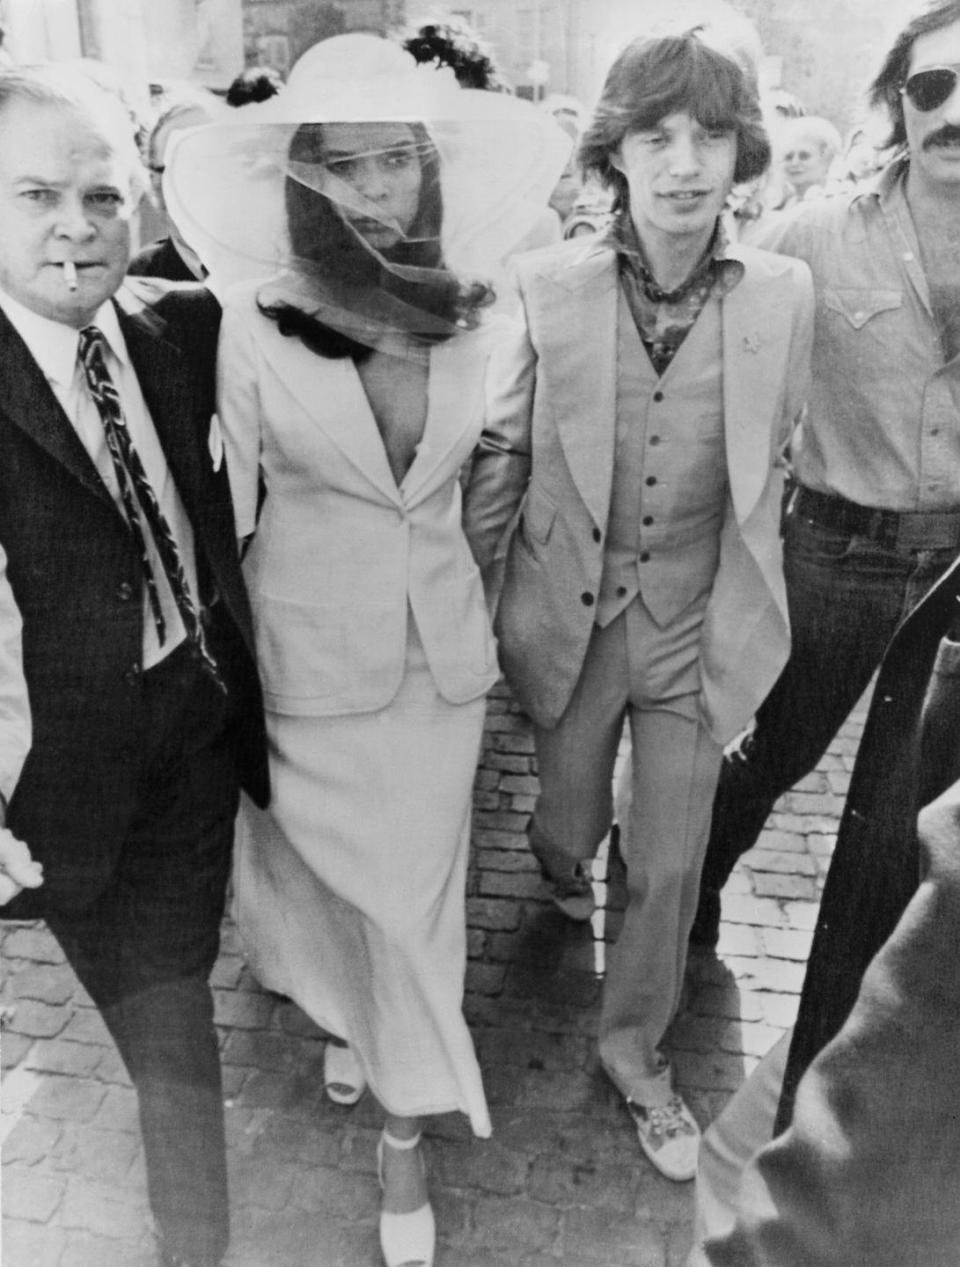 <p>When model Bianca Jagger married Rolling Stones lead singer Mick Jagger in 1971, she wore a low-cut white skirt suit that was by no means conventional, yet it's still easily one of the most stylish celebrity bridal looks of the decade.</p>